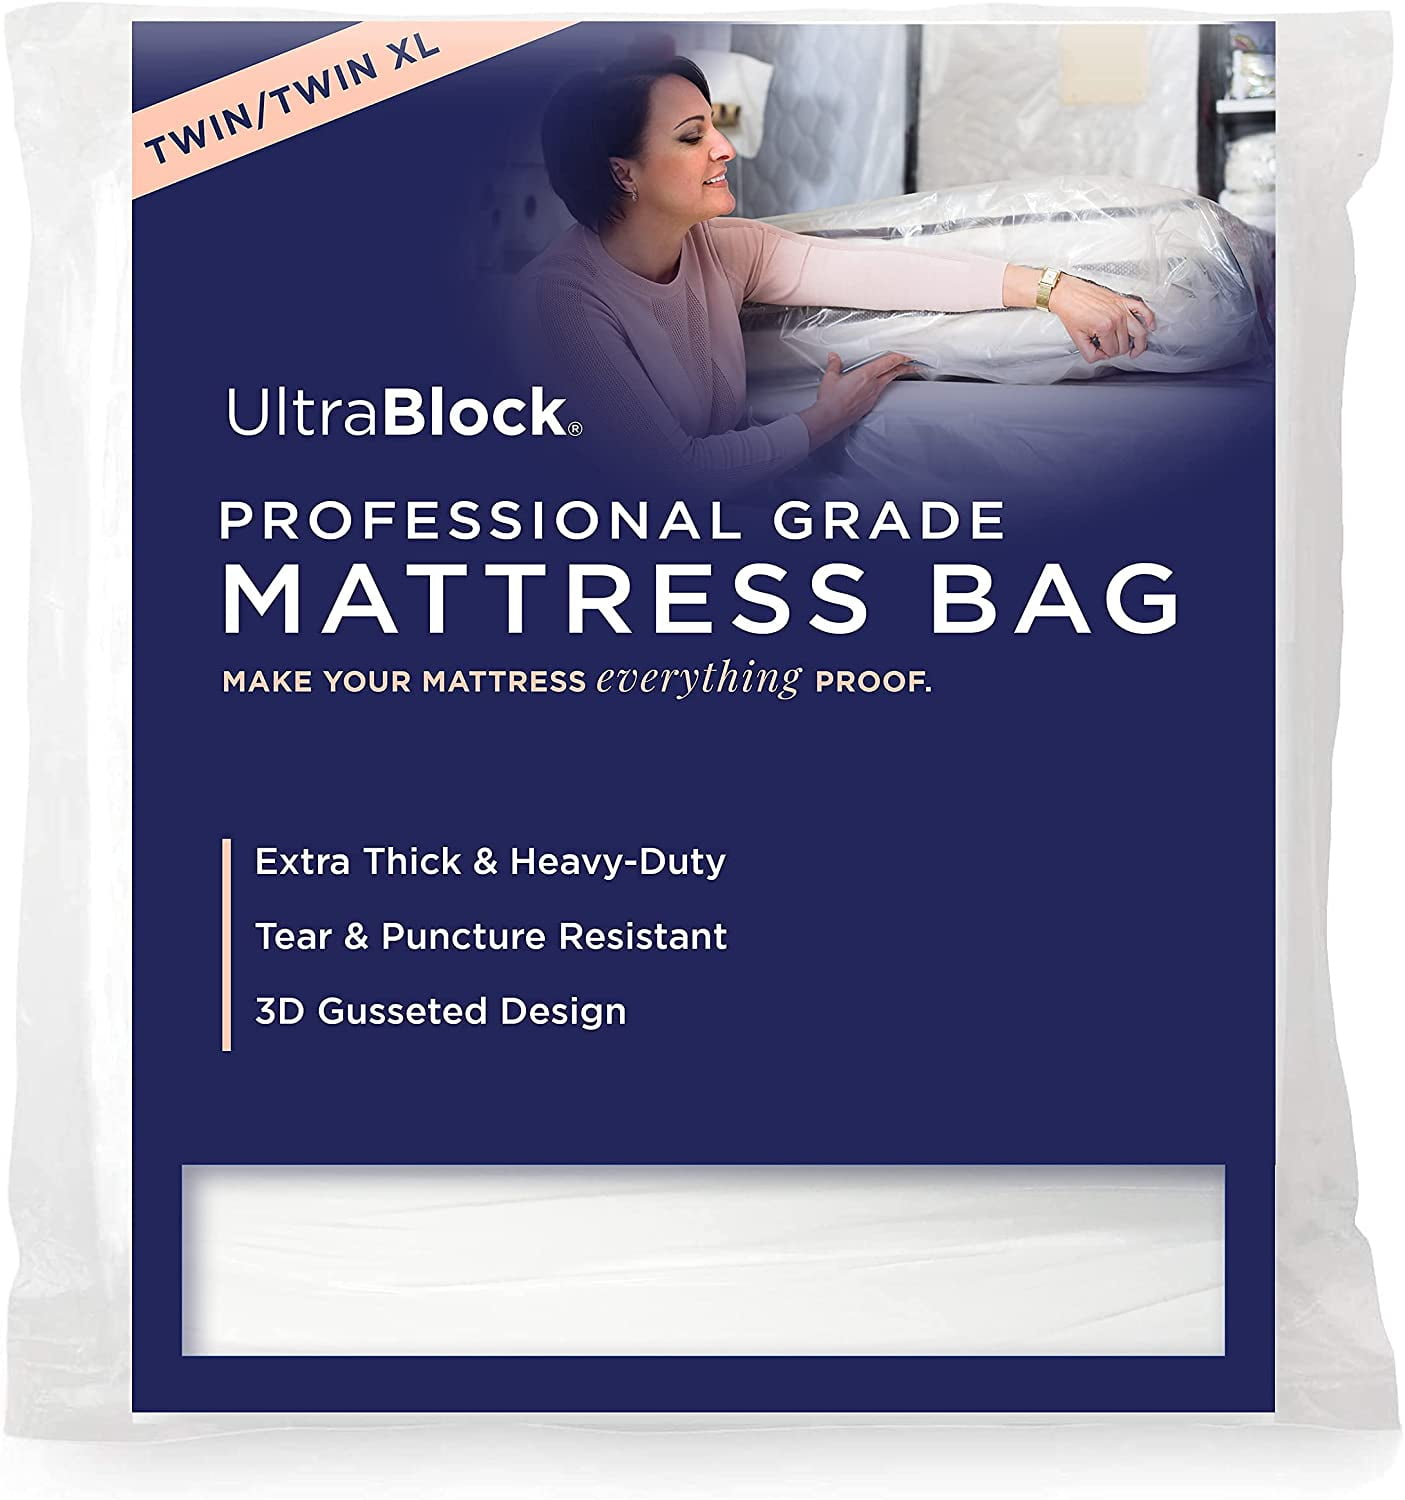 Extra Heavy Duty Mattress Bag Enhanced with Zipper 5 mil Extra Thick for Moving & Long-Term Storage Single/Twin/Twin Tear Resistant and Waterproof